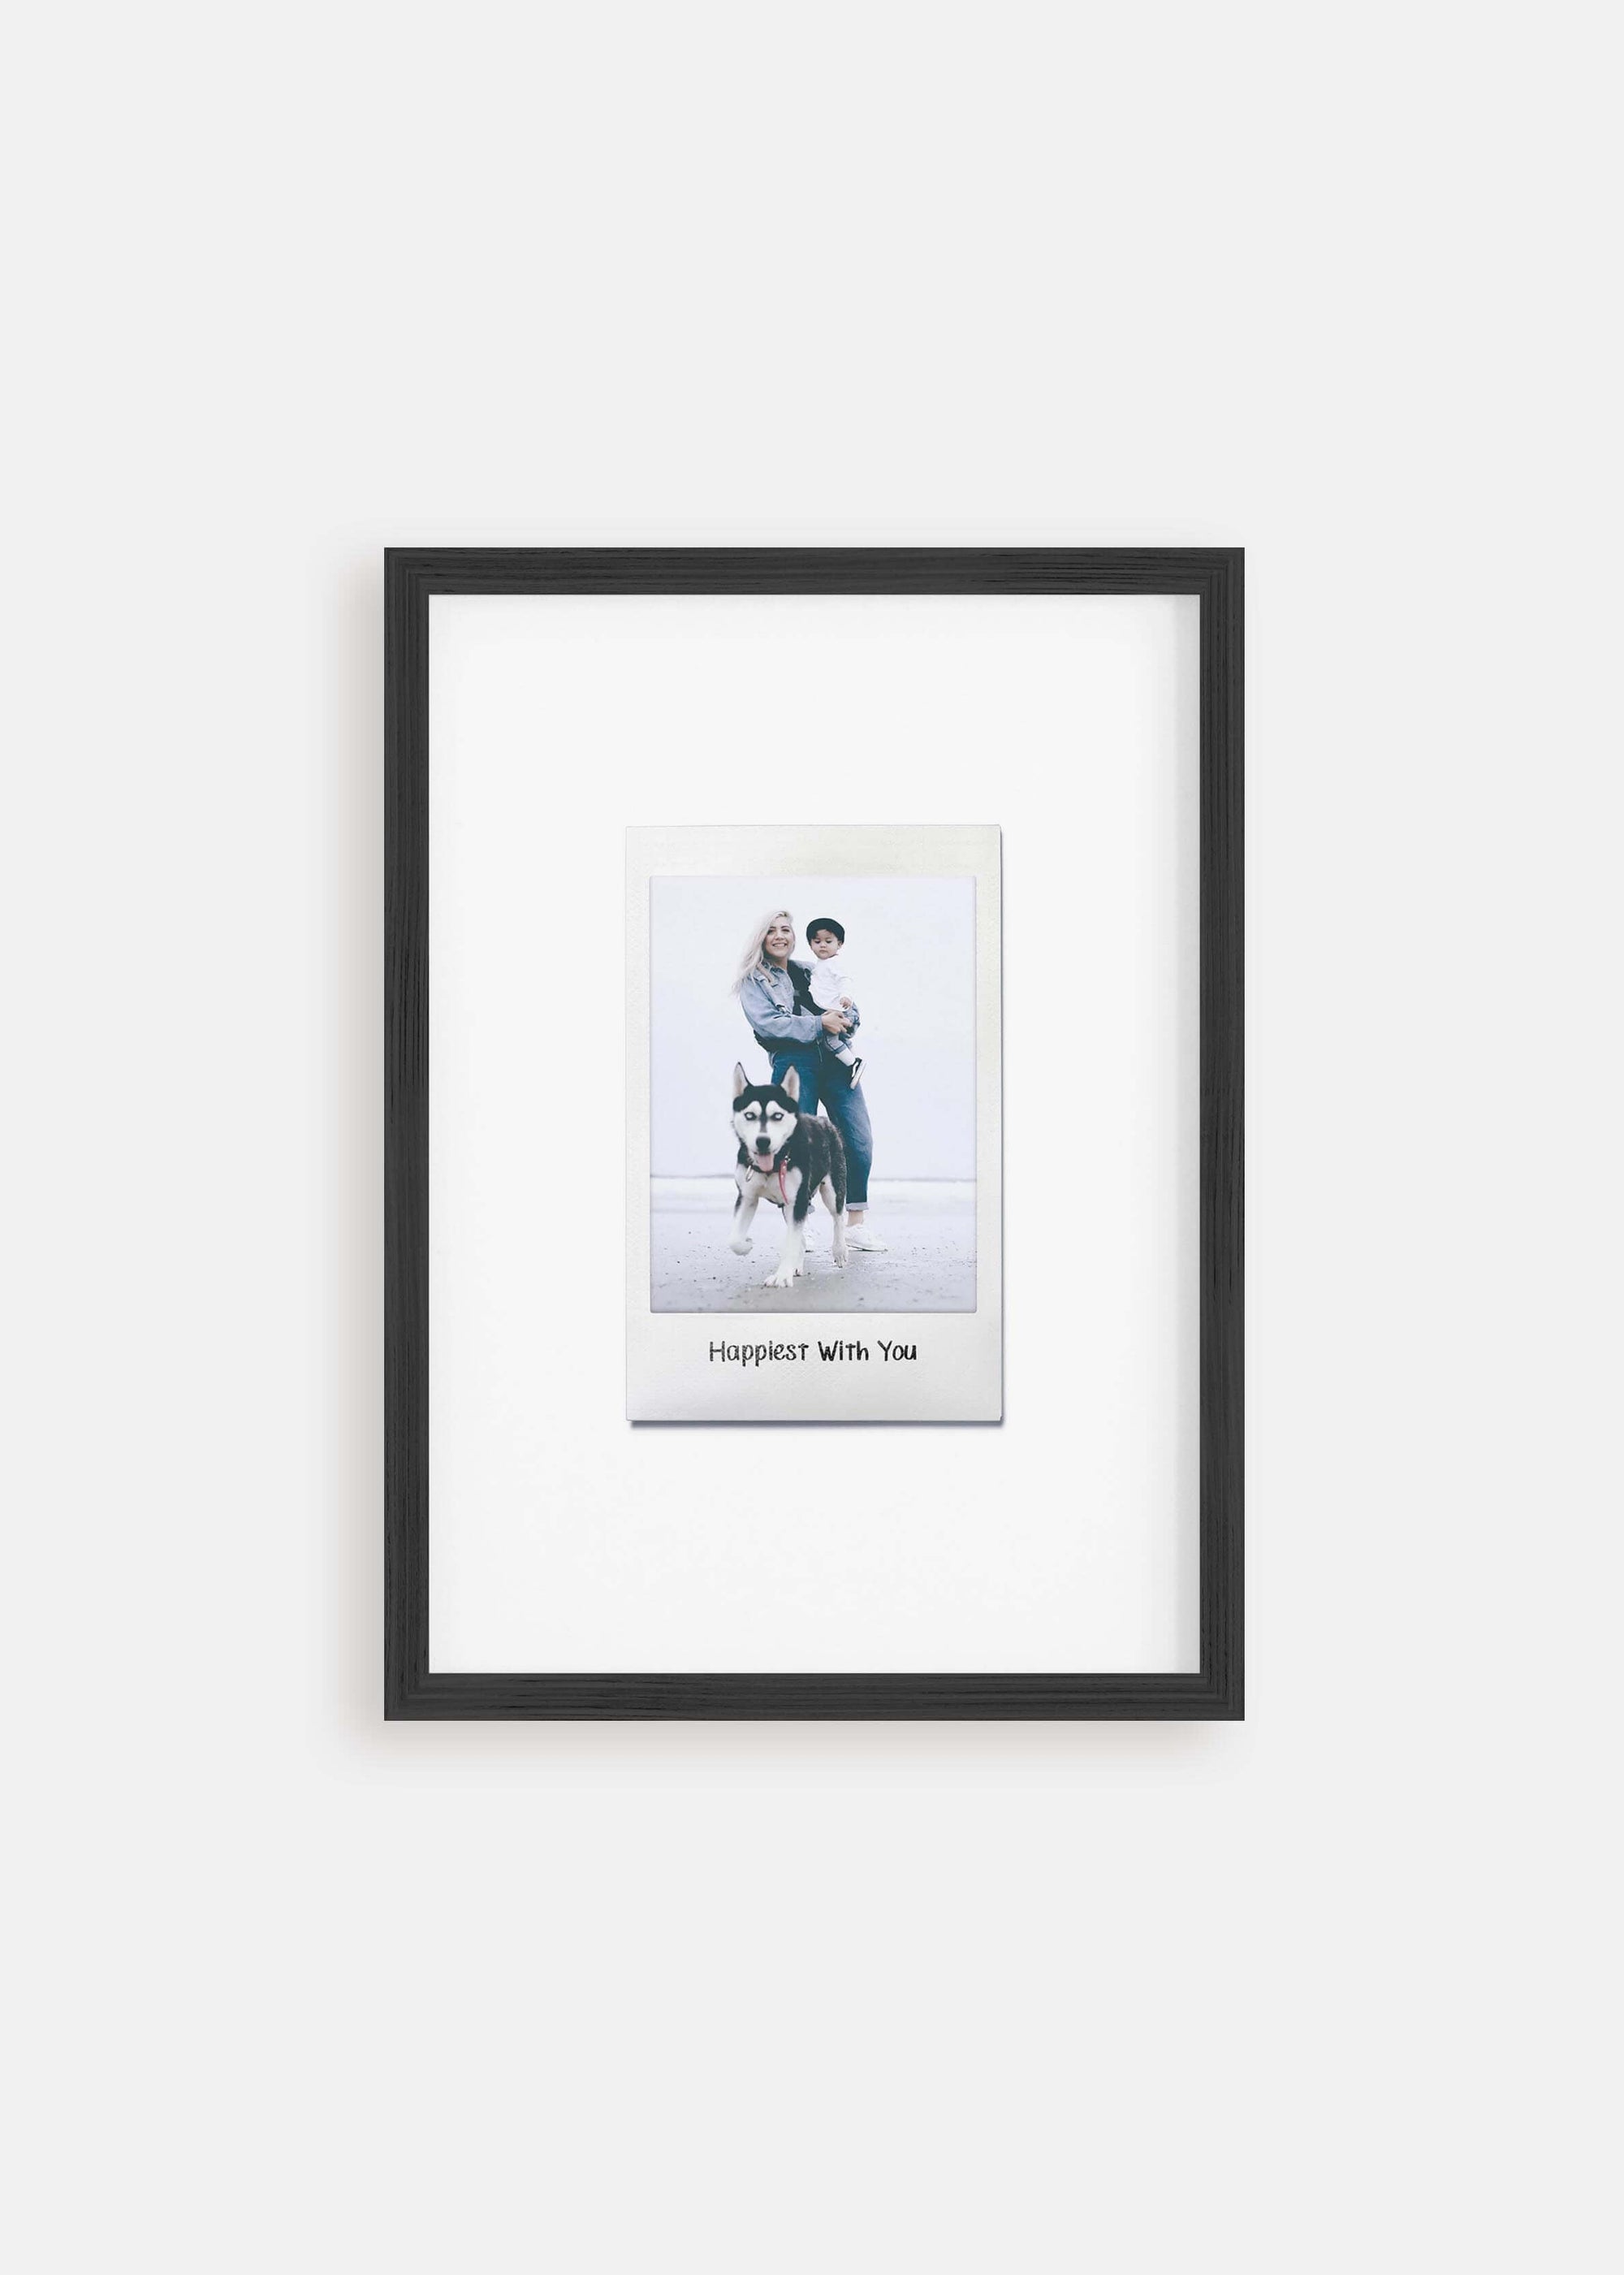 Personalized photo gift of a woman with her child and dog in a black frame in the style of a nostalgic instant film custom polaroid photo with frame on white background.